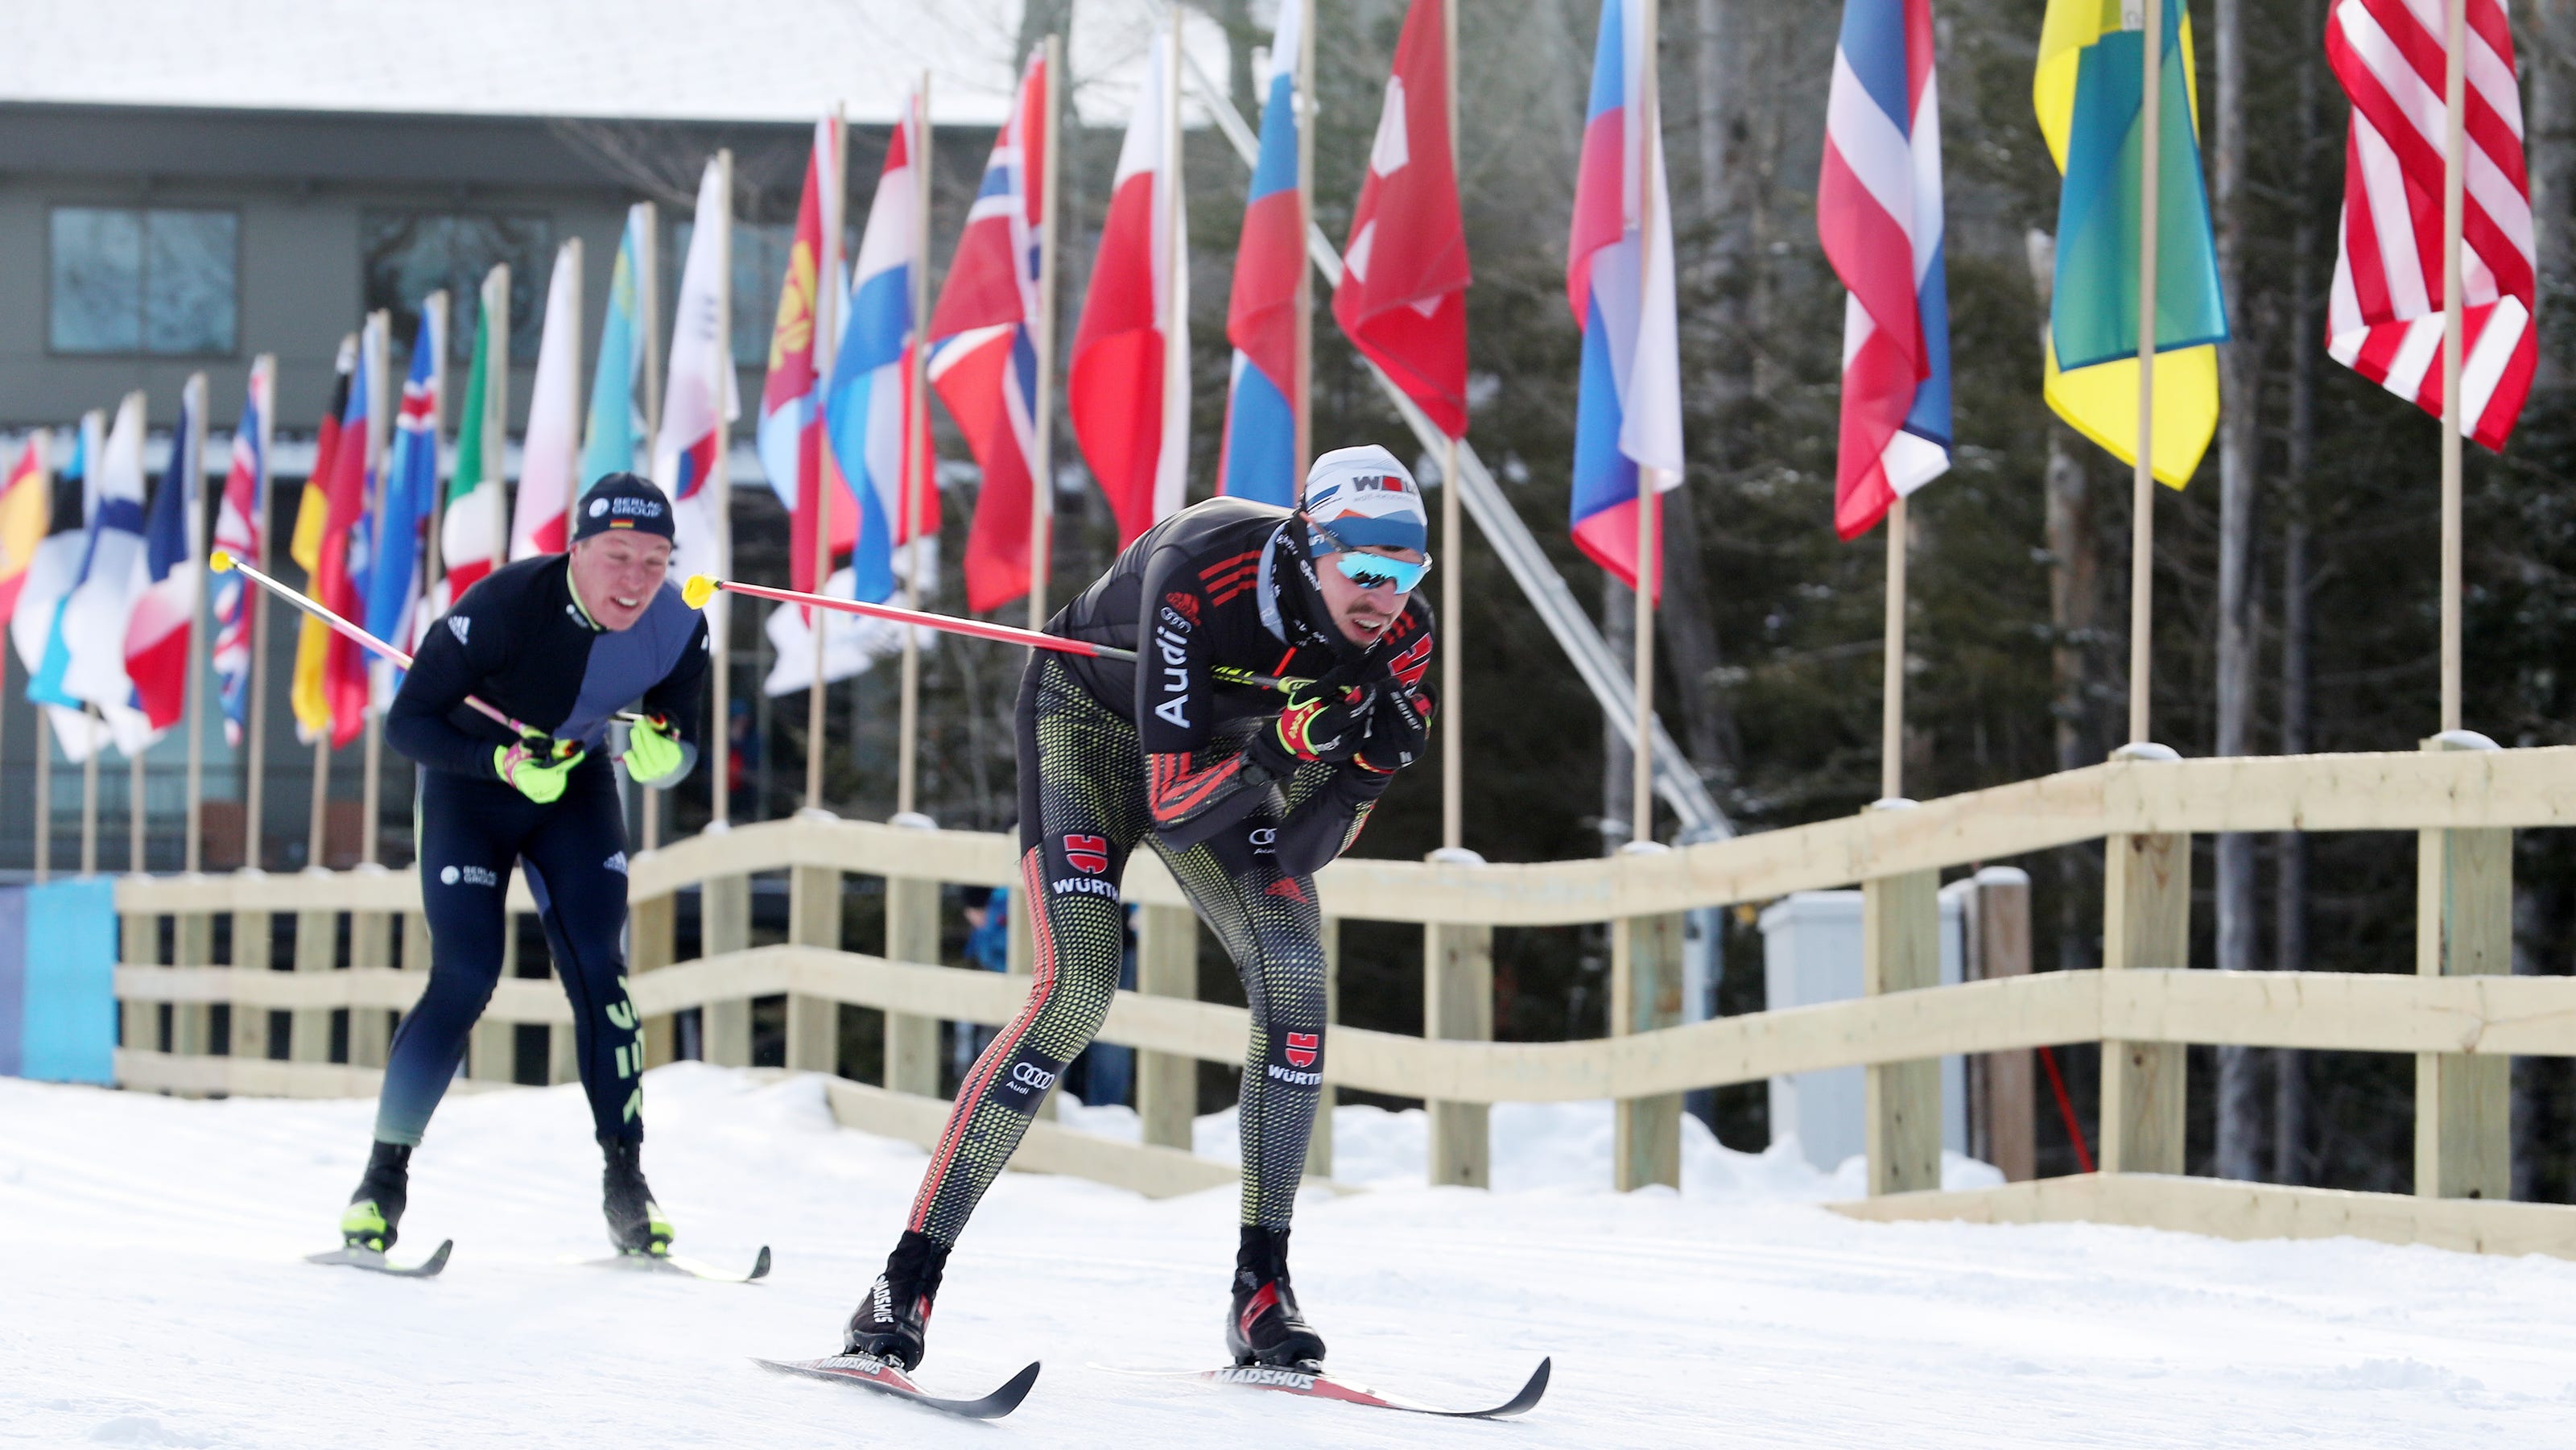 Millions in investments boost Lake Placid for World University Games